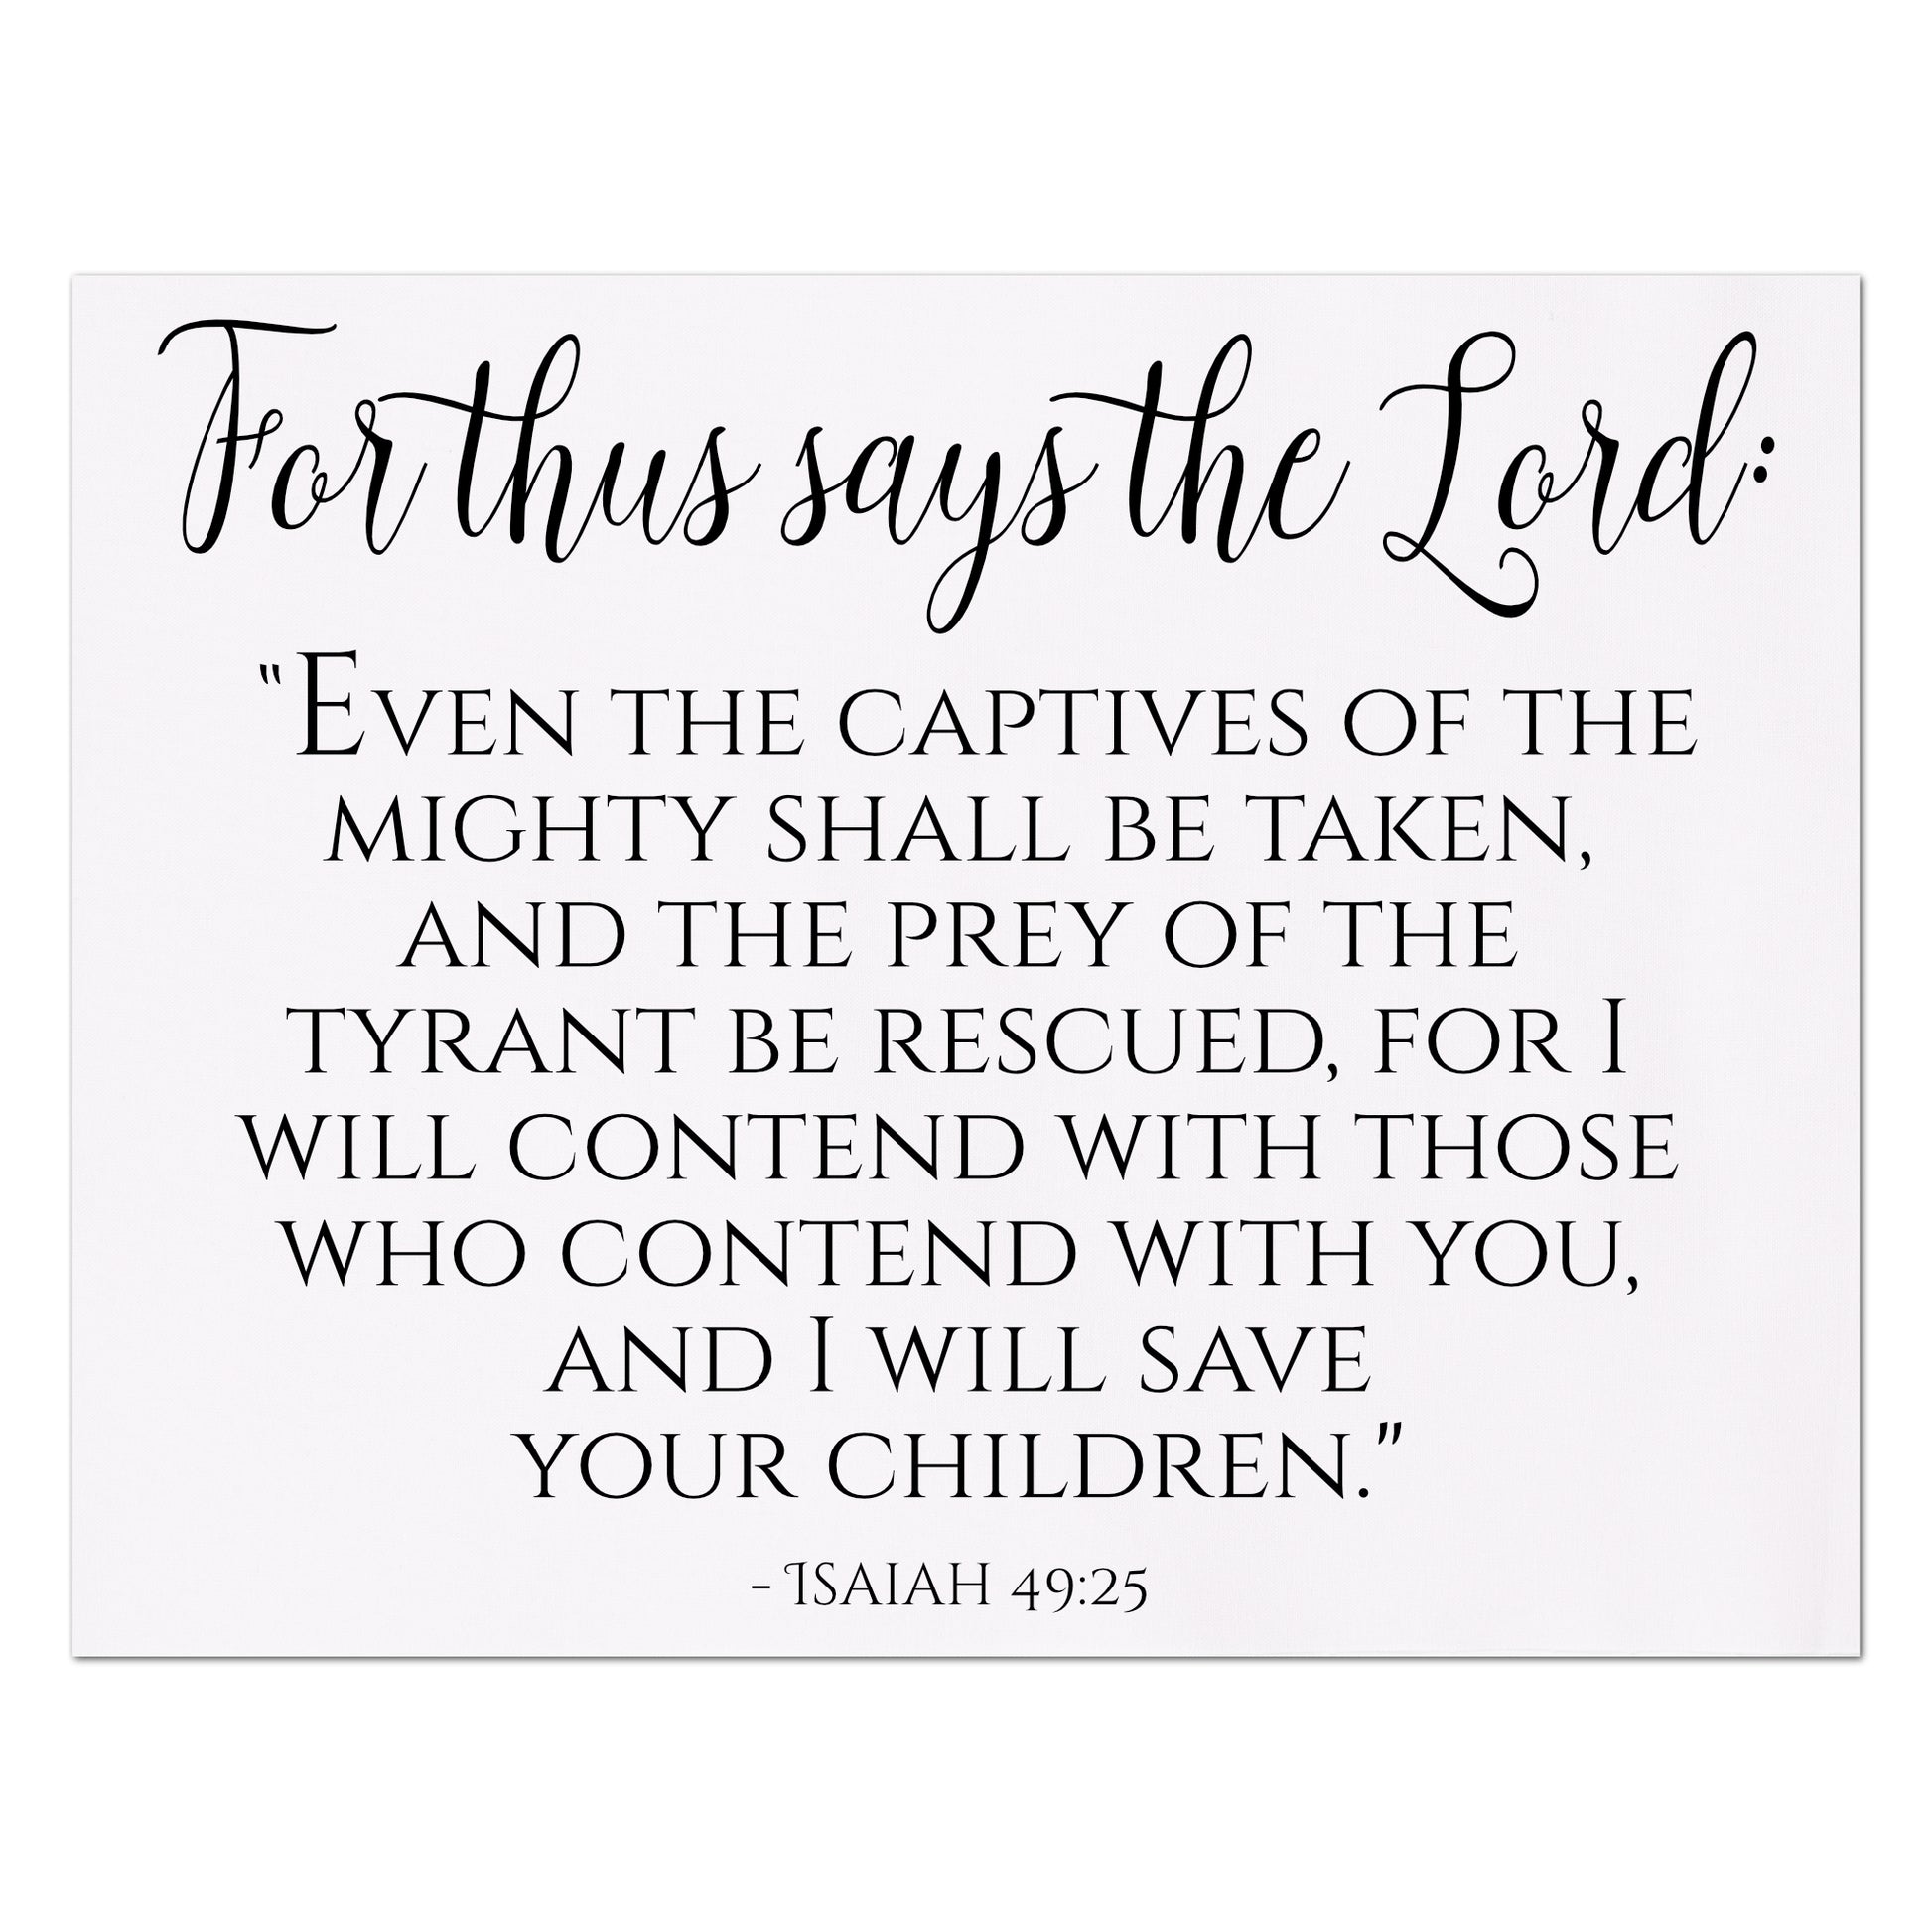 For thus says the Lord:  Even the captives of the mighty shall be taken and the prey of the tyrant be rescued, for I will contend with those who contend with you, and I will save your children - Isaiah 49 25